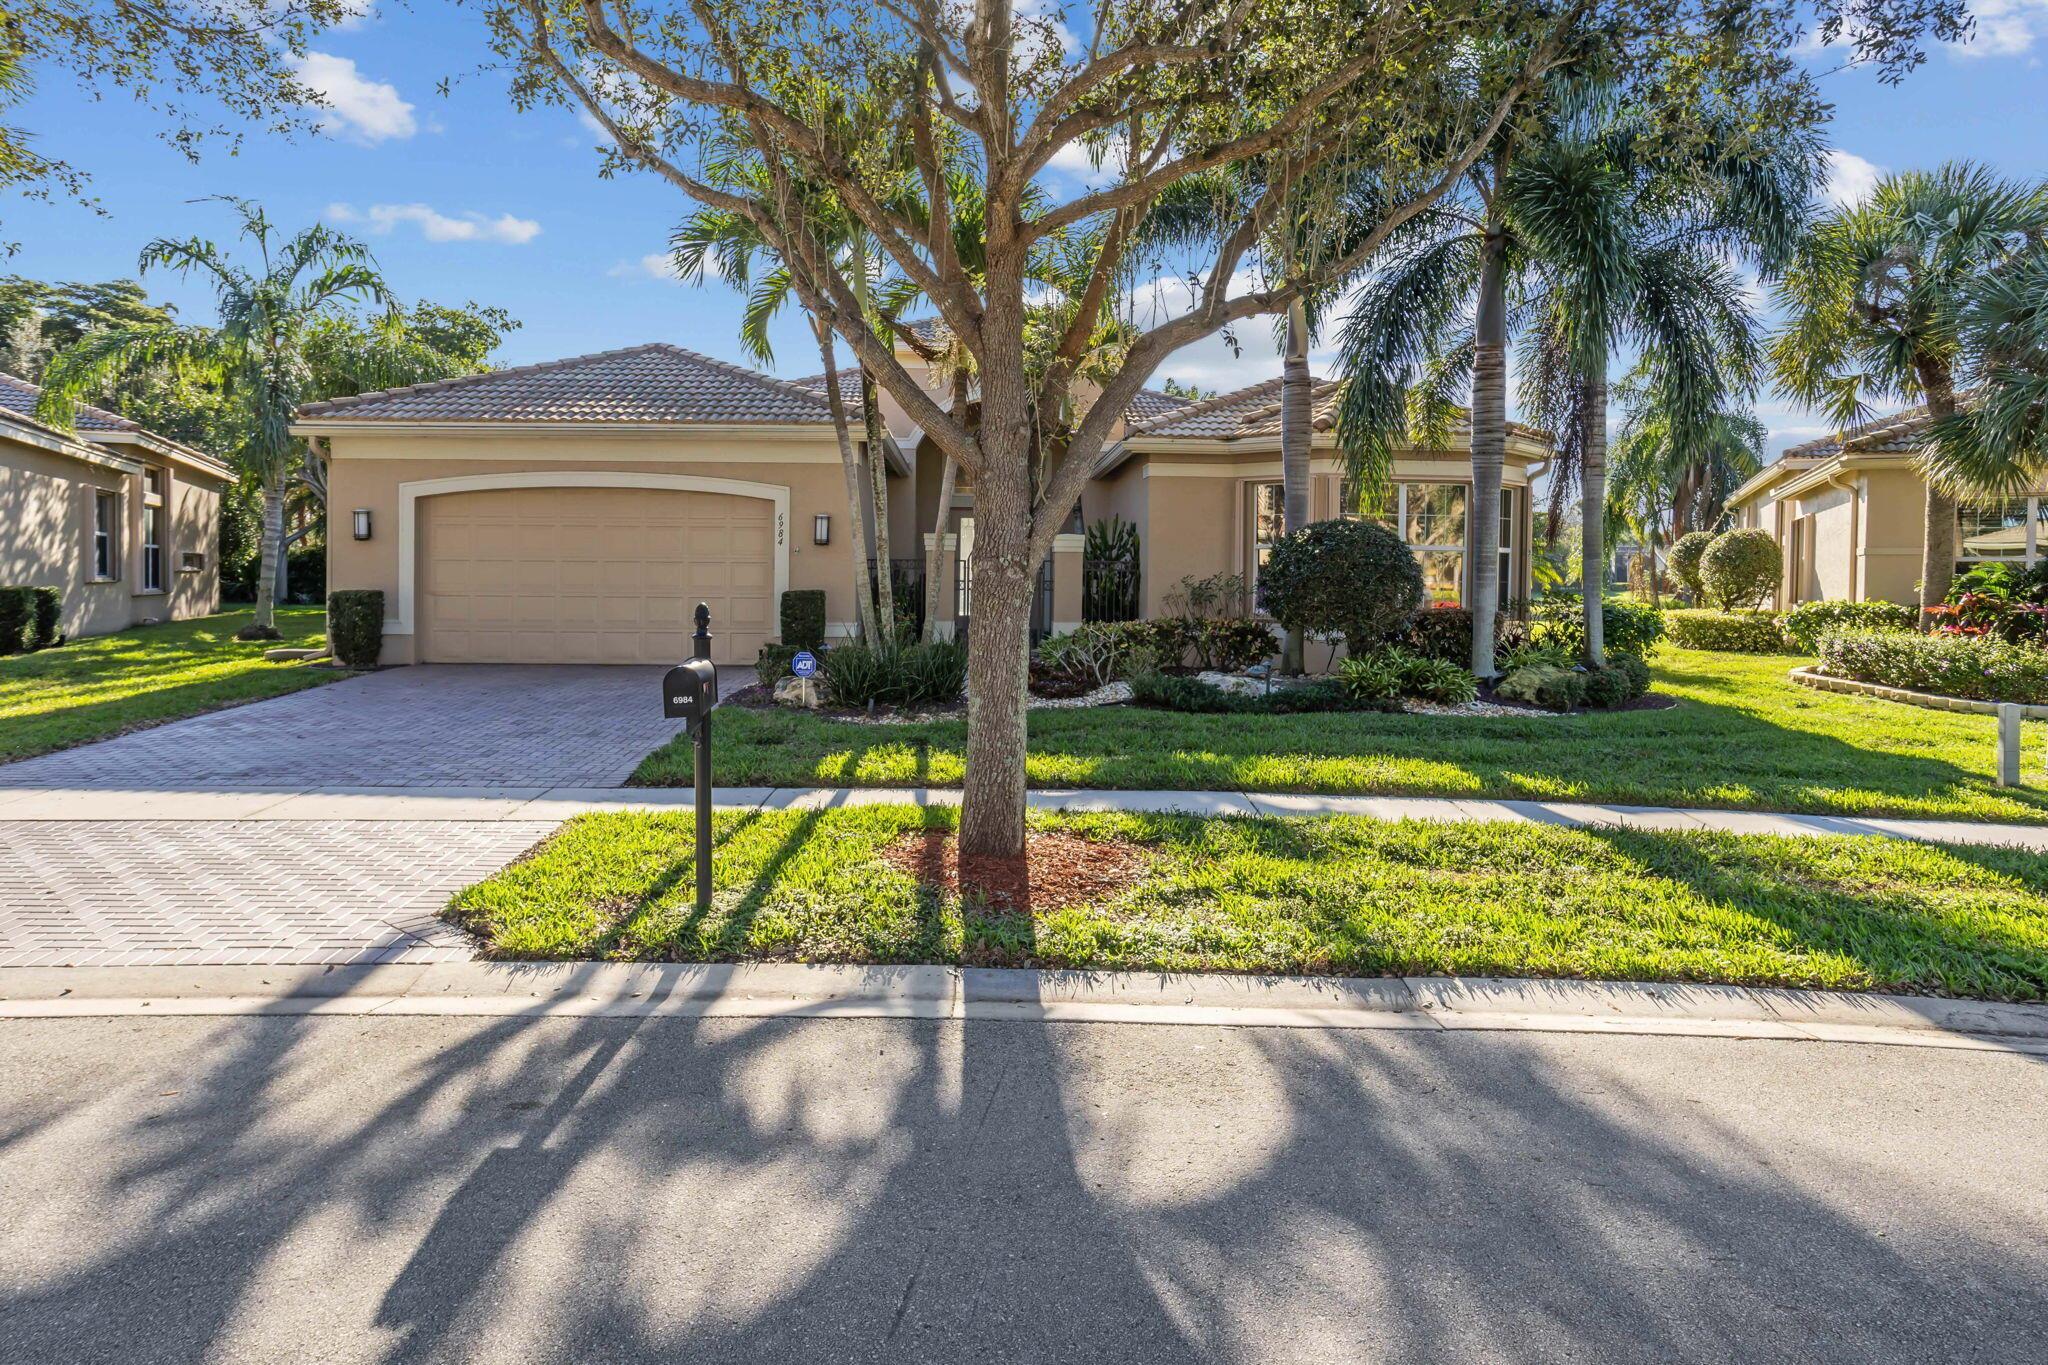 Discover the charm of this exquisite home, a true gem in the heart of Boynton Beach's Valencia Pointe community. This 3-bedroom, 2.5-bath haven is a lakefront beauty, offering a one-of-a-kind retreat for those seeking luxury and comfort. As you enter through the double glass hurricane doors with a modern design and new hardware, you're greeted by the timeless beauty of this Pamplona model. The hurricane arched window above adds a touch of sophistication, while accordion storm shutters ensure peace of mind throughout the entire home. Inside, bask in the glow of recessed lighting and crown molding, with 20x20 beige, white lace porcelain tile seamlessly flowing through the house. Granite countertops in the kitchen and baths, coupled with a cultured marble tub in the master bath, reflect a commitment to quality. Enjoy the convenience of HUGE walk-in custom closets, custom window treatments, wood blinds, and a sink and fridge water purifying system. The kitchen is a culinary masterpiece with a beautiful custom island, offering extra storage and outlets. The garage boasts epoxy flooring, adding a touch of luxury to everyday living. Step outside to a completely private backyard overlooking the largest lake in the development - a rare and peaceful retreat. The front yard enjoys a unique advantage with no house in front, enhancing the exclusivity of this property. Valencia Pointe offers a wealth of amenities, including a 35,000 square foot clubhouse surrounded by gardens and a stunning lake. Stay active with 6 Har-Tru tennis courts, a putting green, 4 Pickleball courts, 2 Har-True bocce courts, and a half-court basketball area. Indulge in the indoor spa with steam rooms, a facial/massage area, resort-style swimming pool, and whirlpool spa. This vibrant 55+ community provides an active lifestyle with over 100 social clubs, resort-style activities, and top-notch security with a manned gated entry. Exclusive "resident only" entrances add an extra layer of privacy. Benefit from HOA-covered amenities such as Hotwire fiber optic cable TV and Internet, ADT monitoring, lawn maintenance, irrigation system, and common area upkeep.